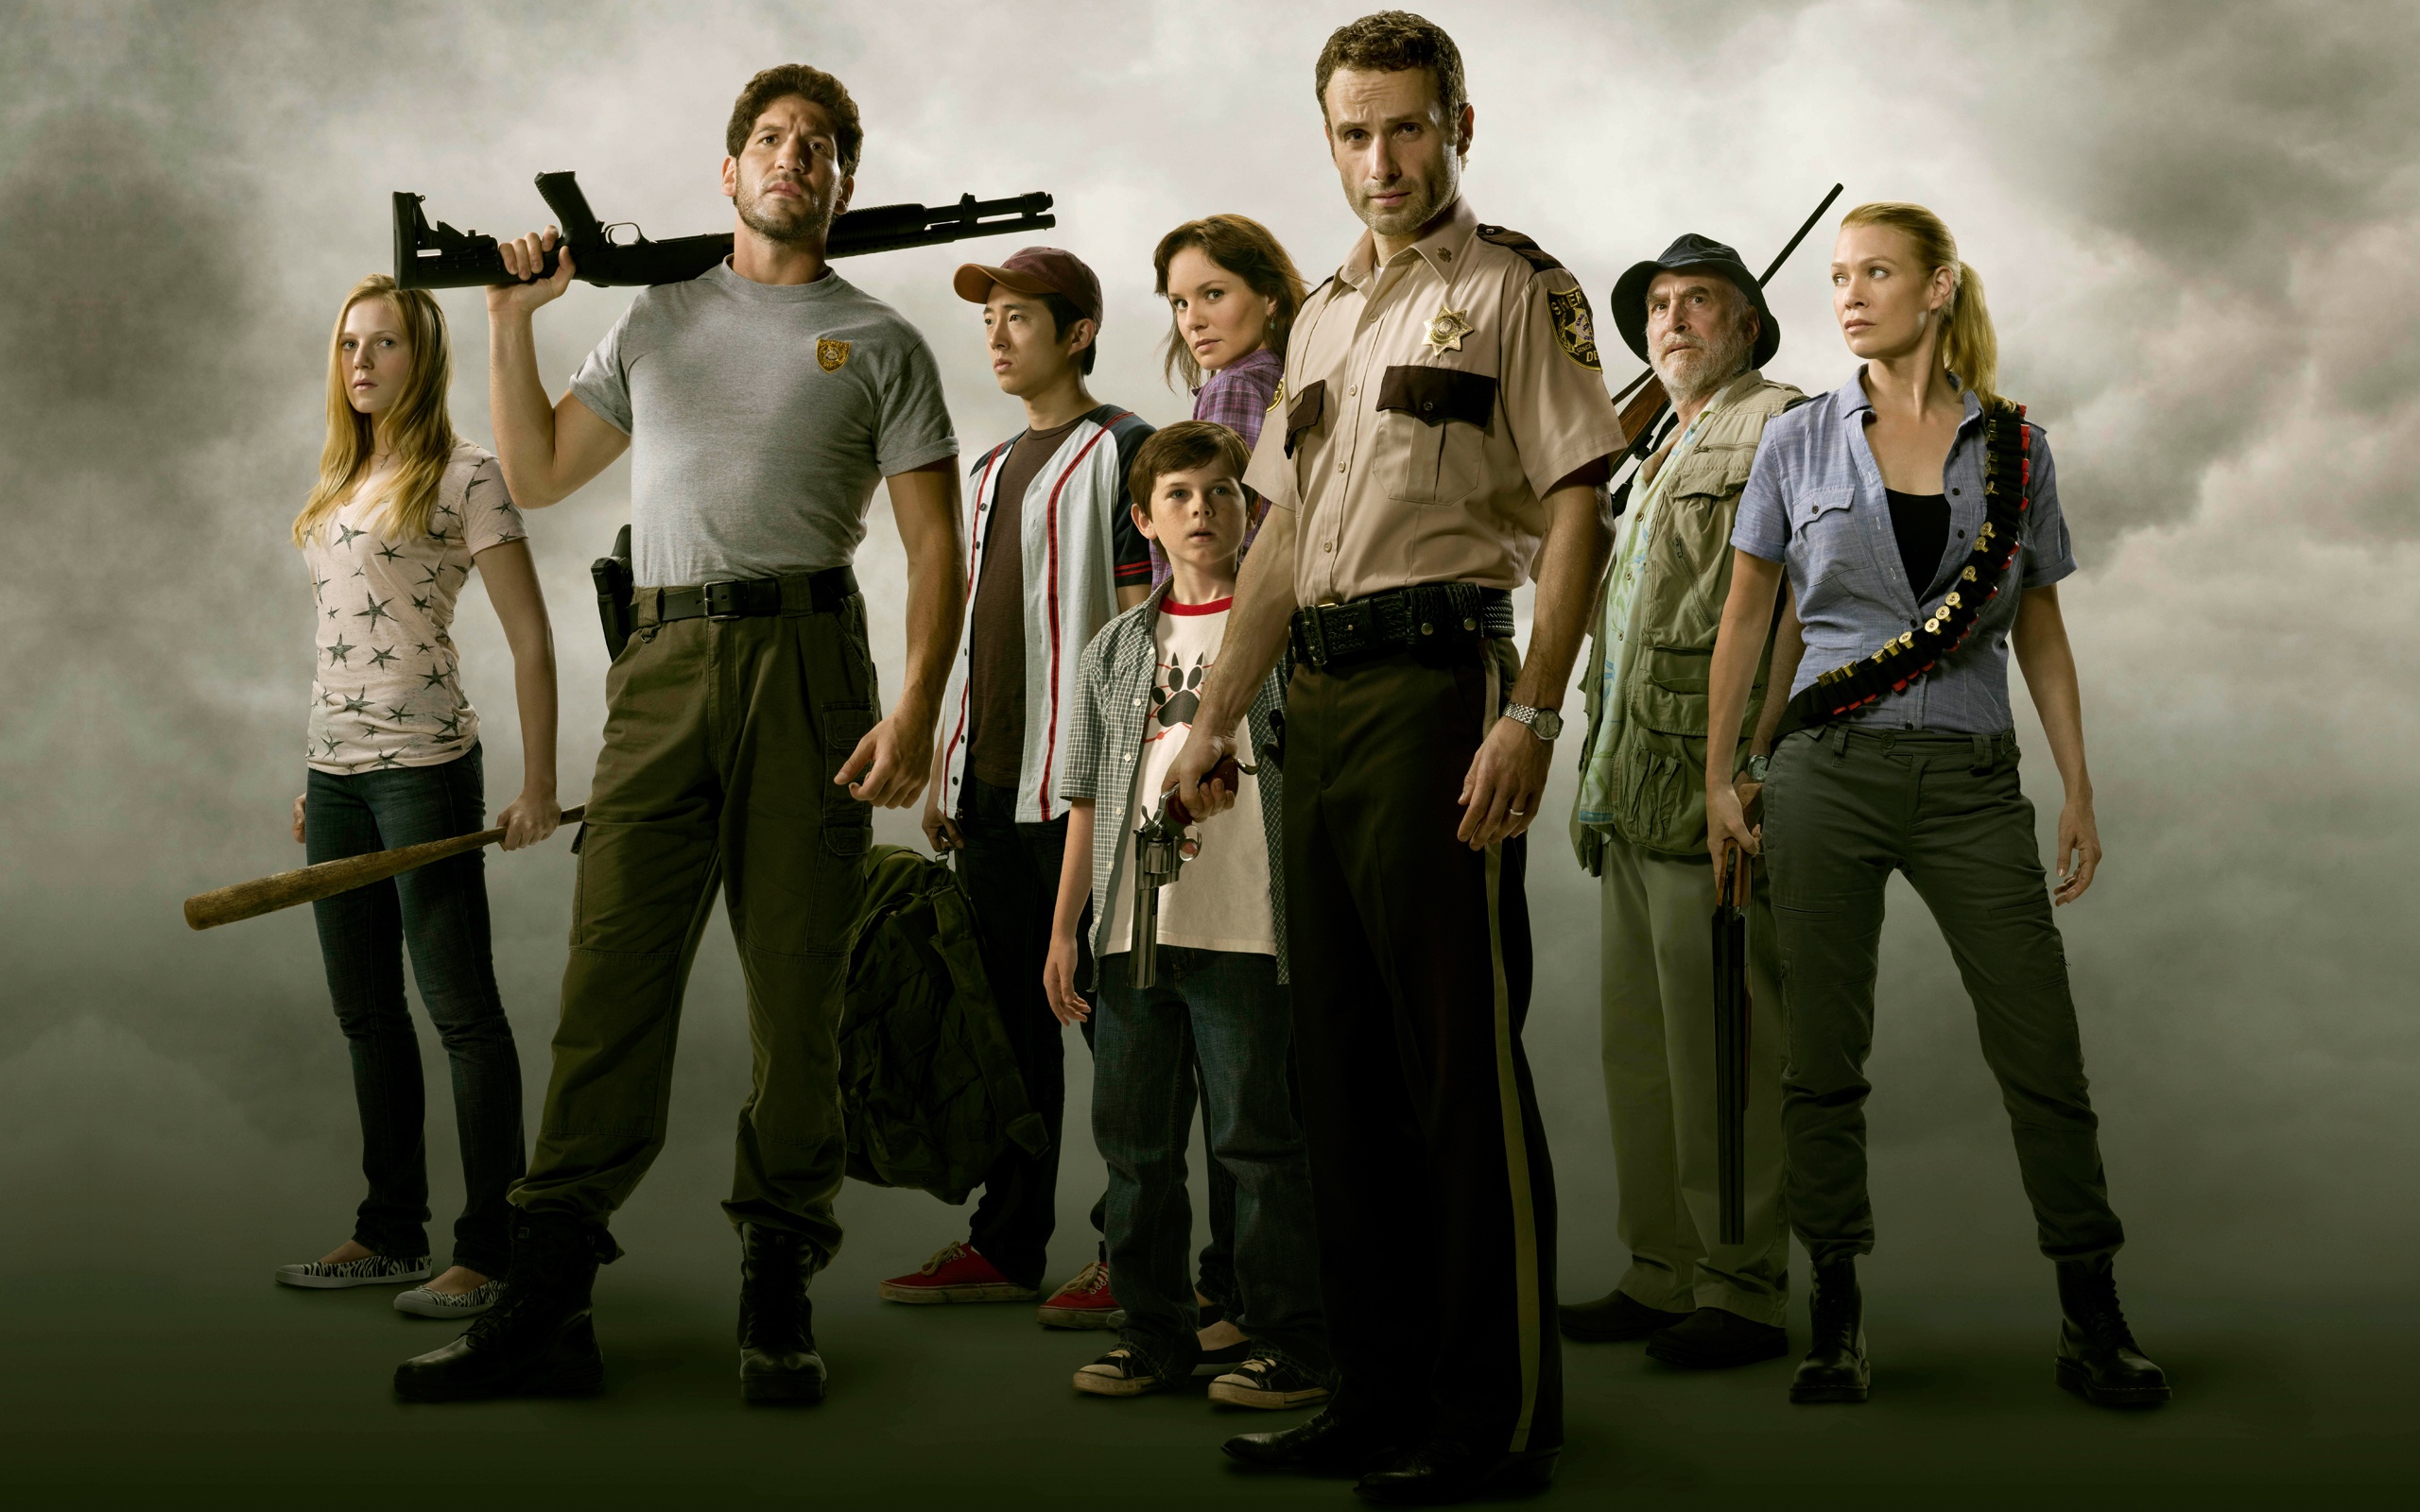 Ratings: South Florida Likes Gossip and Zombies